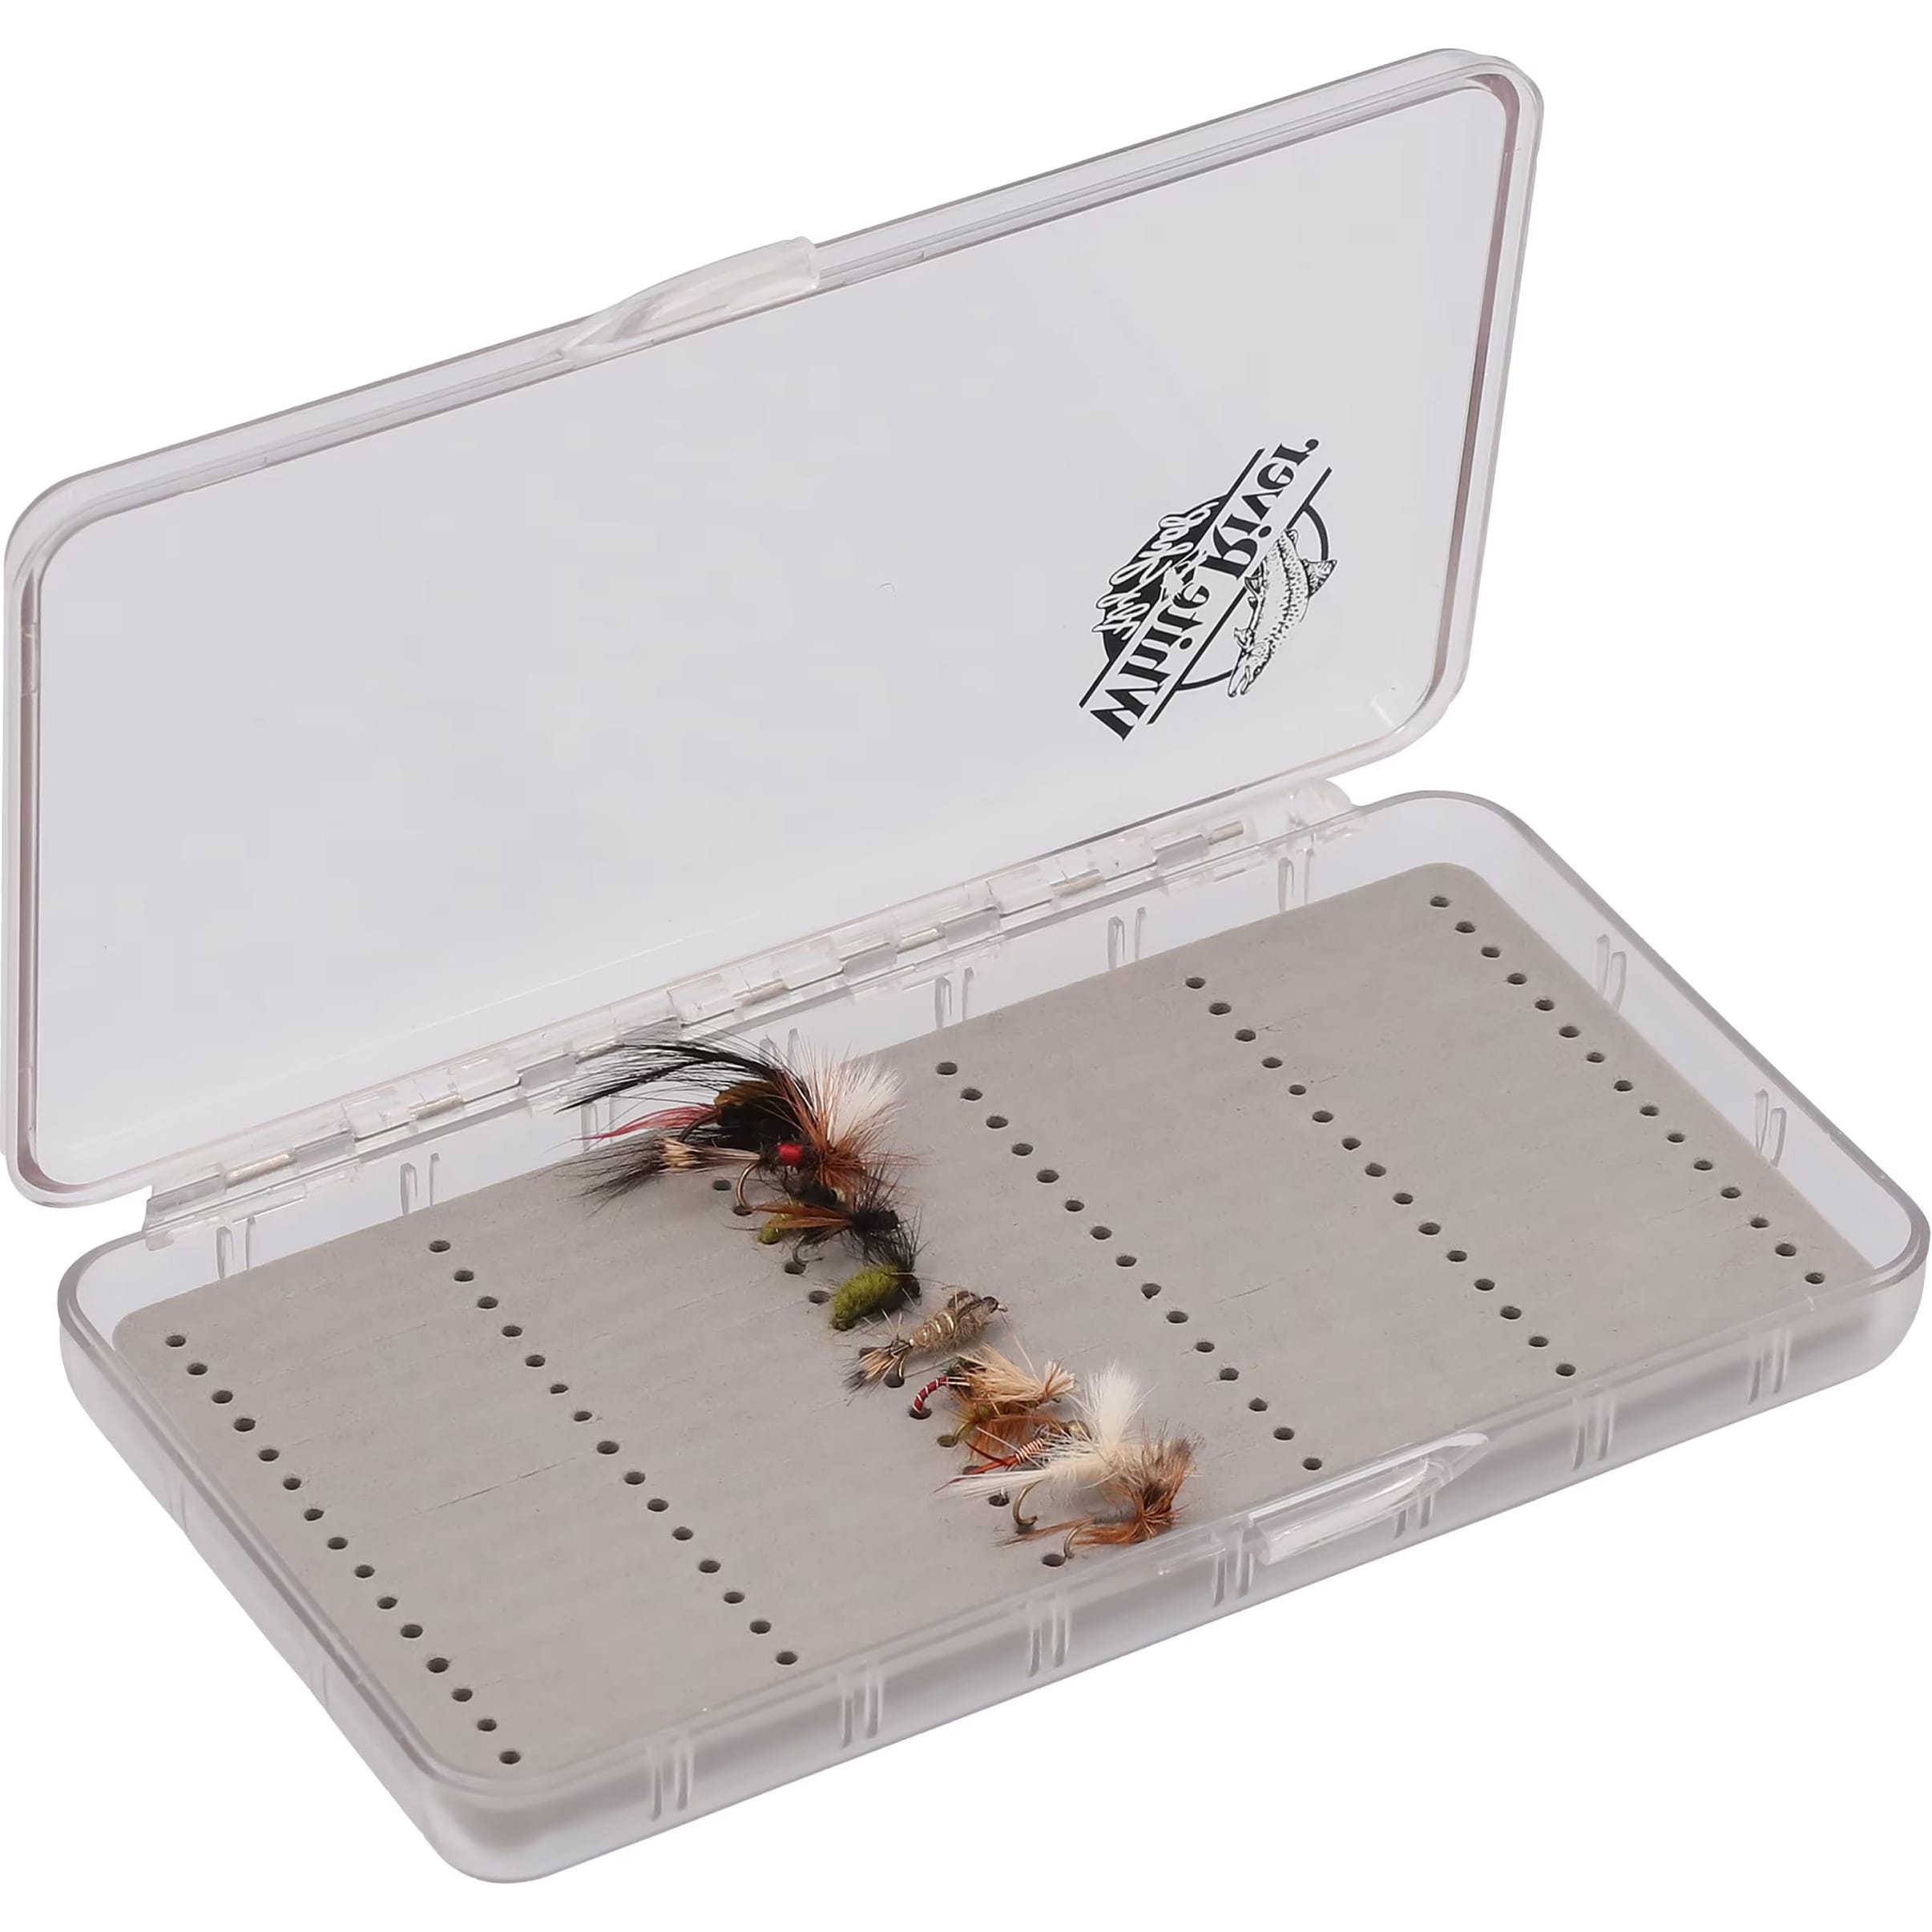 Fly Fishing Tackle Boxes, Foam Fishing Fly Box